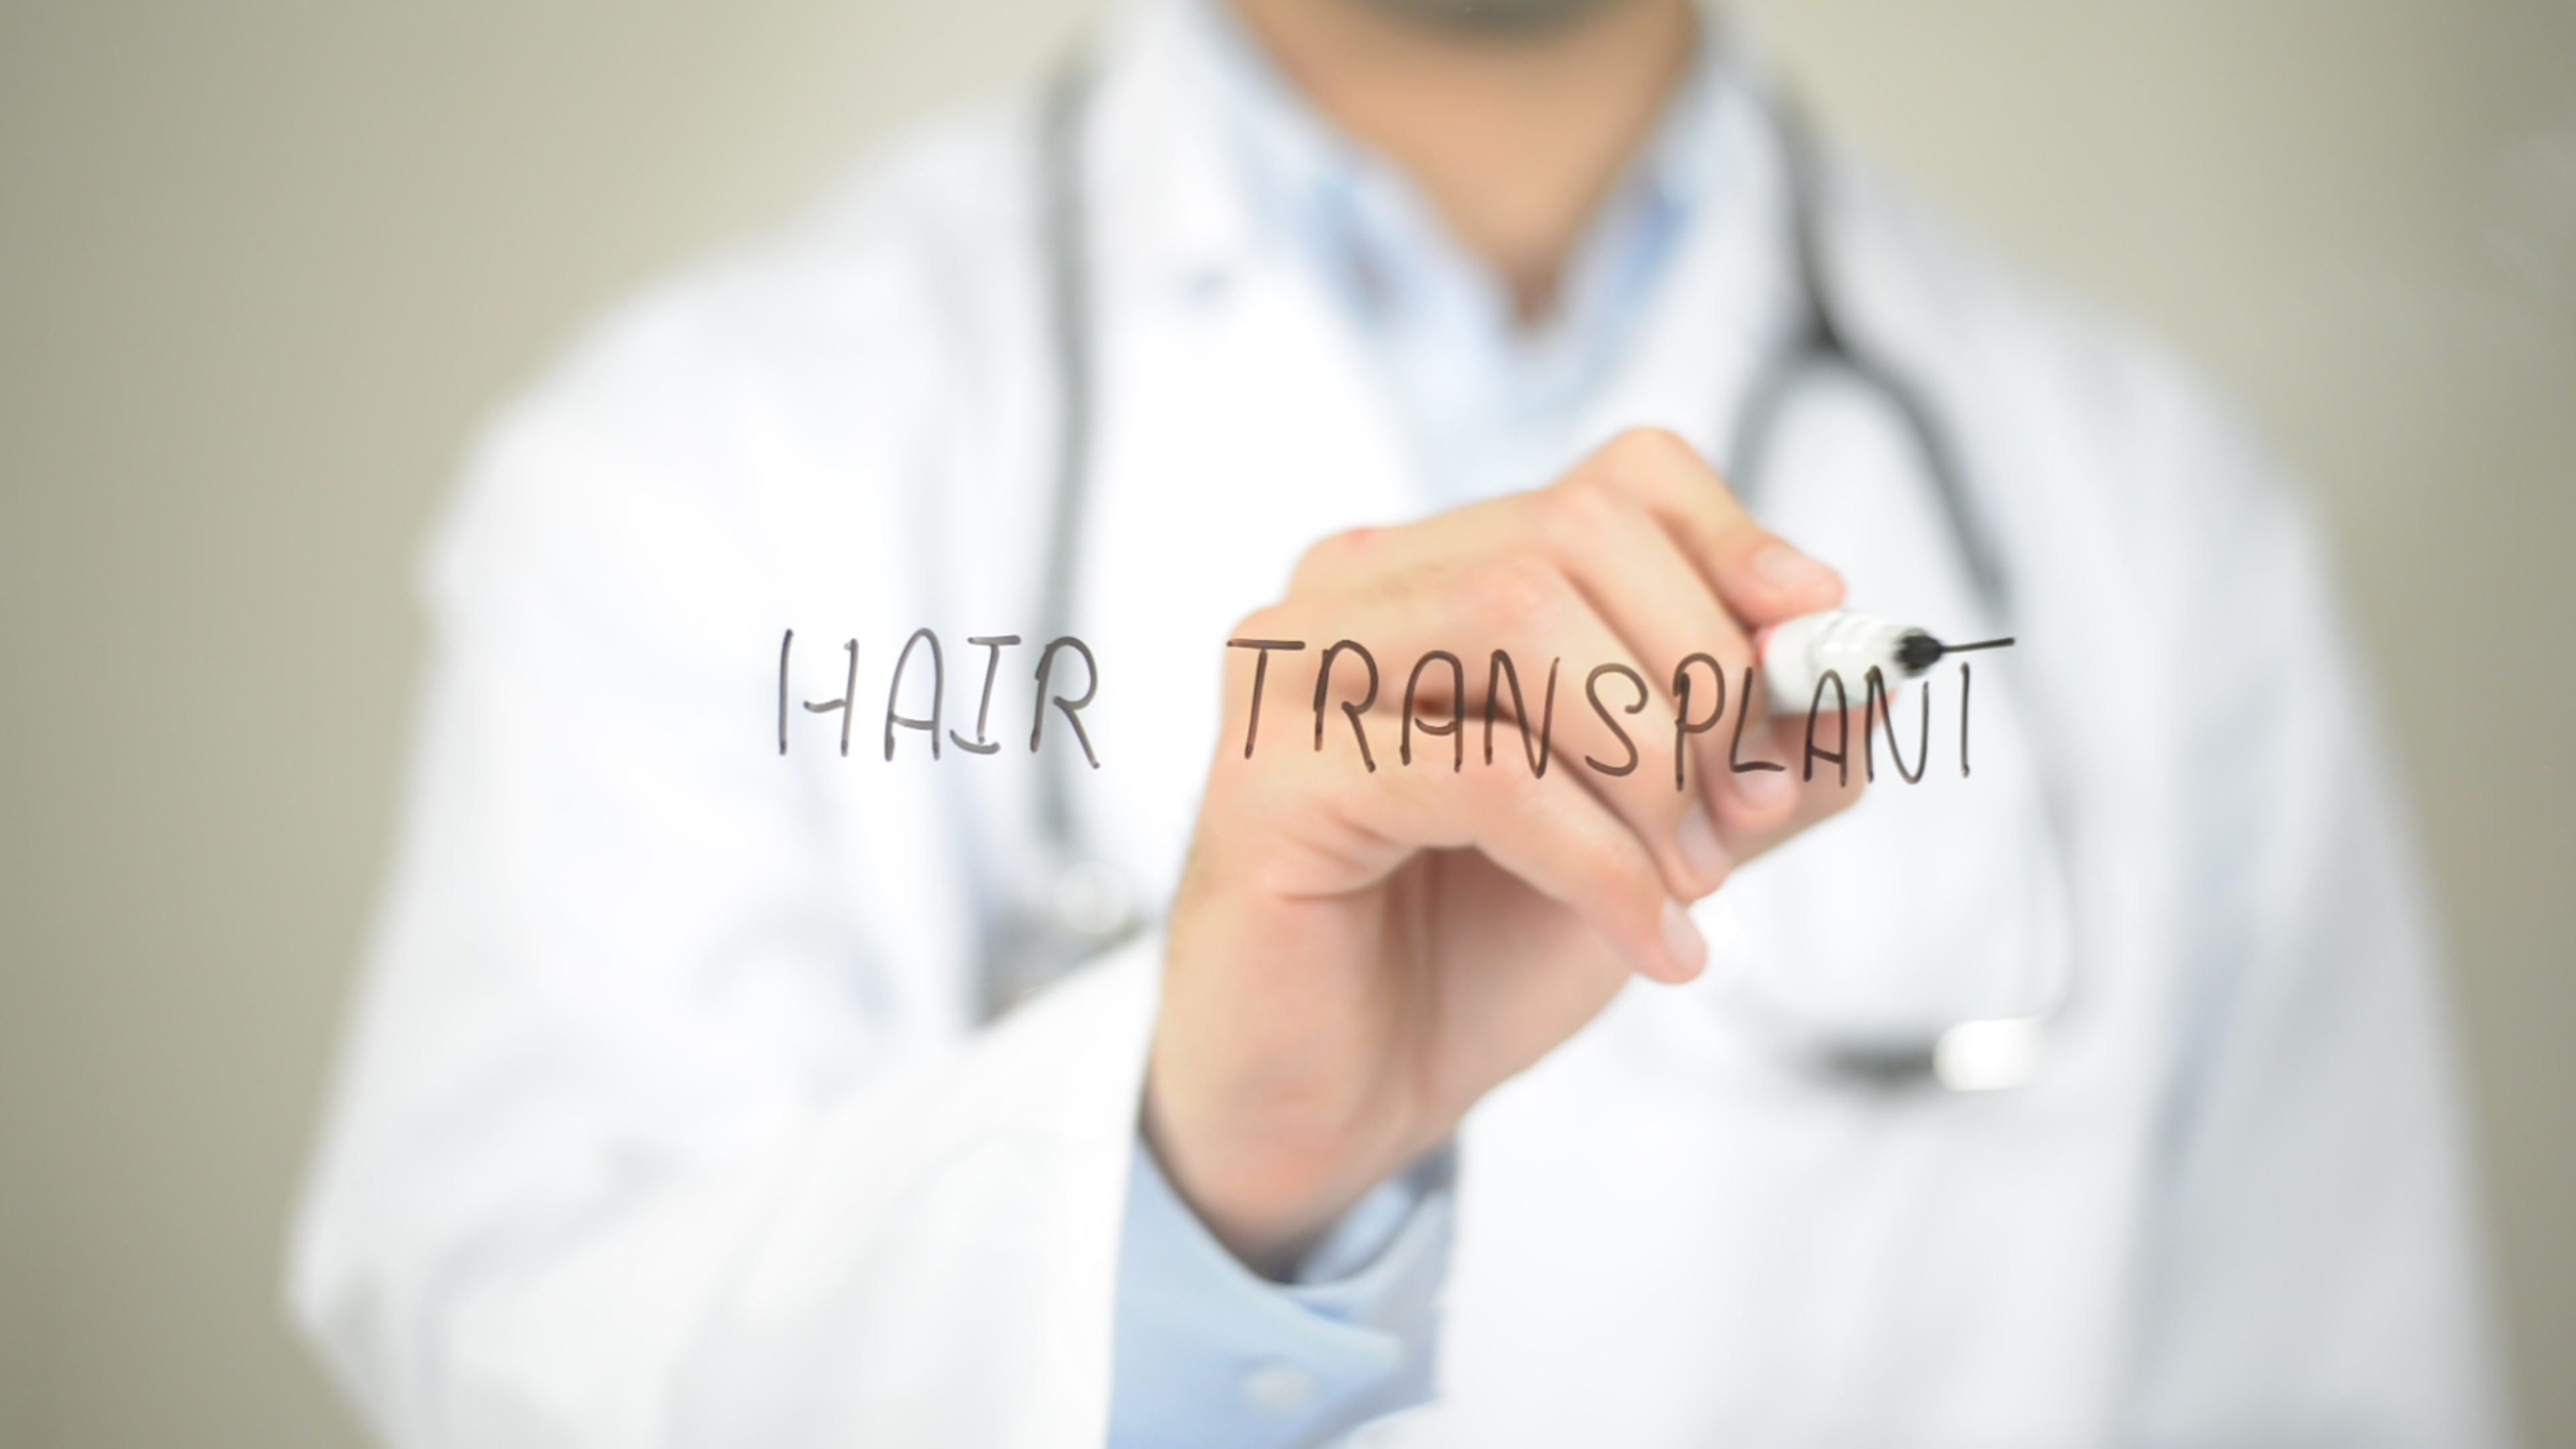 Hair Transplant , Doctor writing on transparent screen